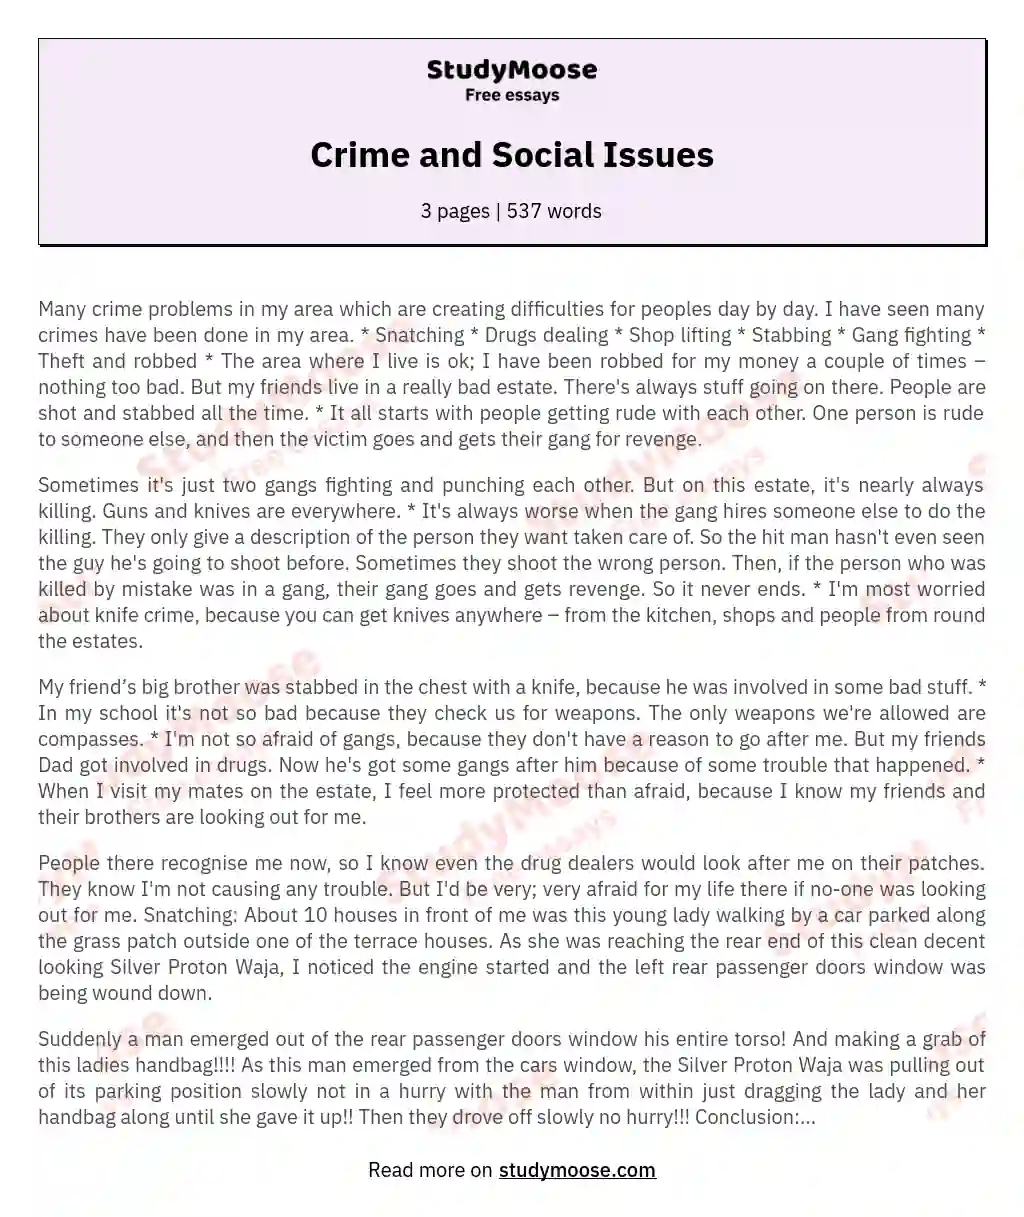 Crime and Social Issues essay